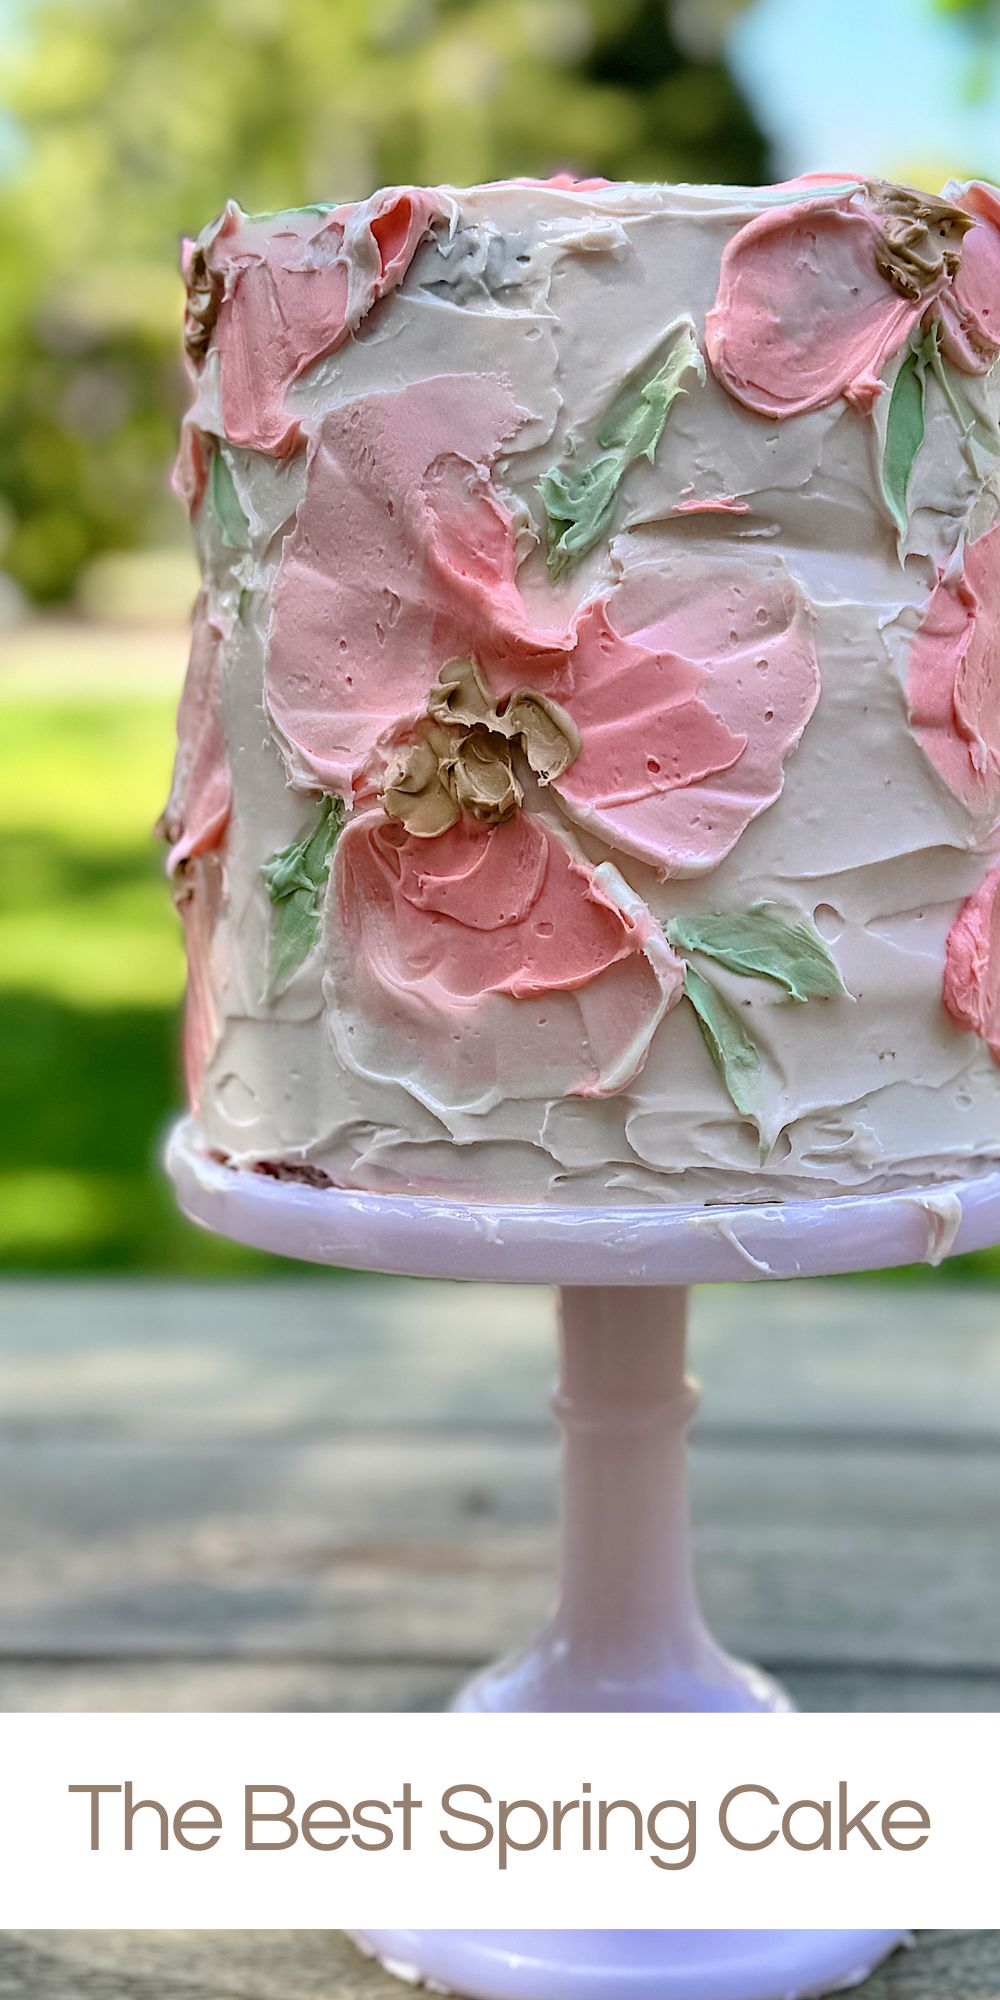 Nothing says celebration quite like a beautifully decorated spring cake, and this three-tier white cake will steal the show on any special occasion.